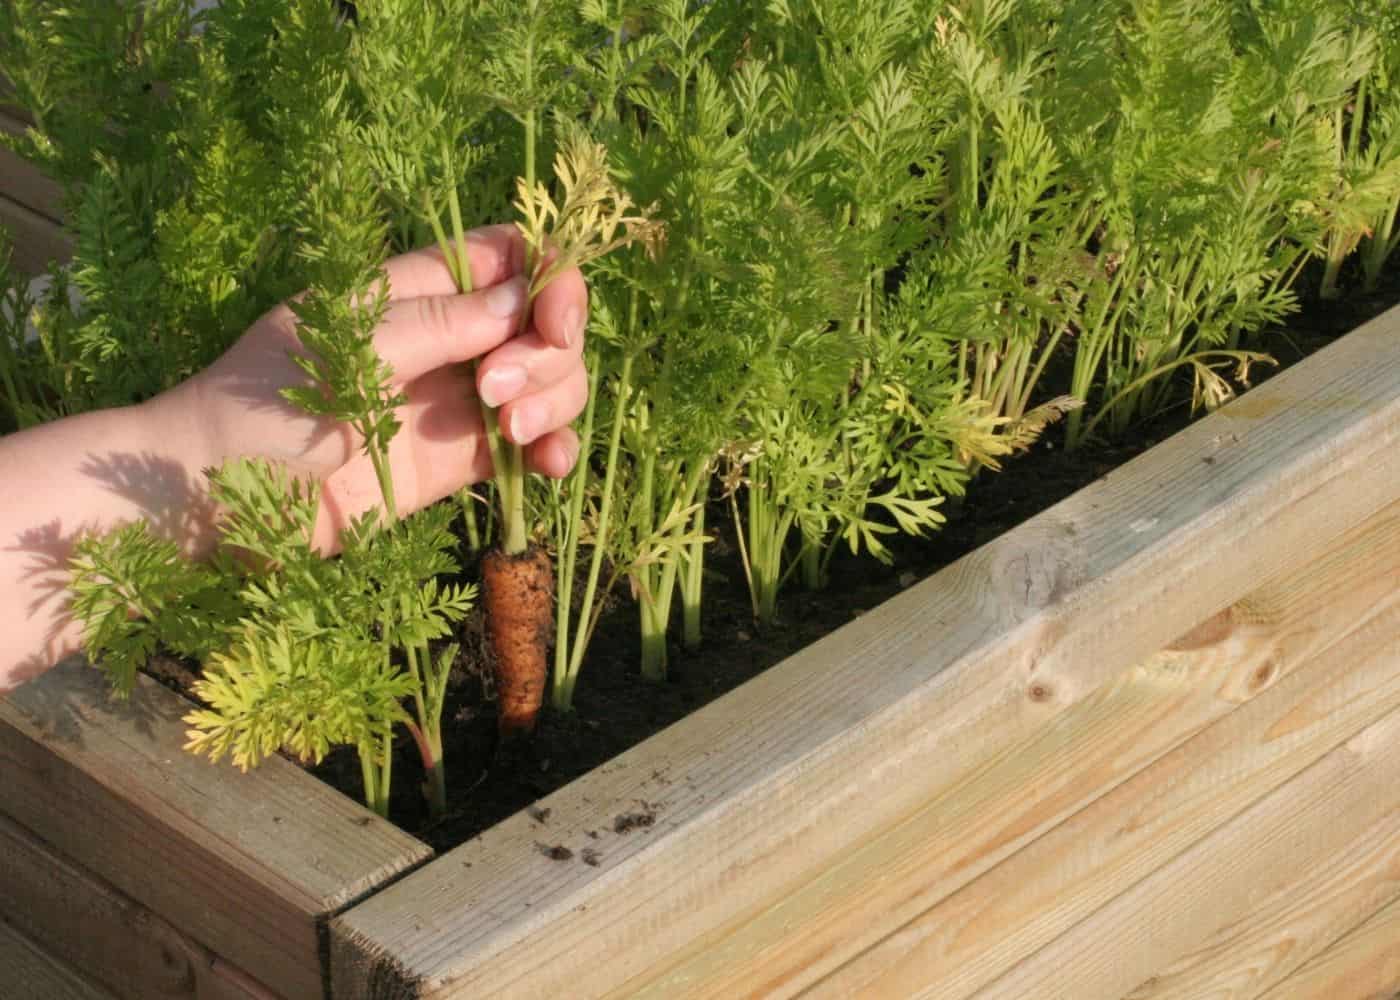 Carrots - companion plants for tomatoes